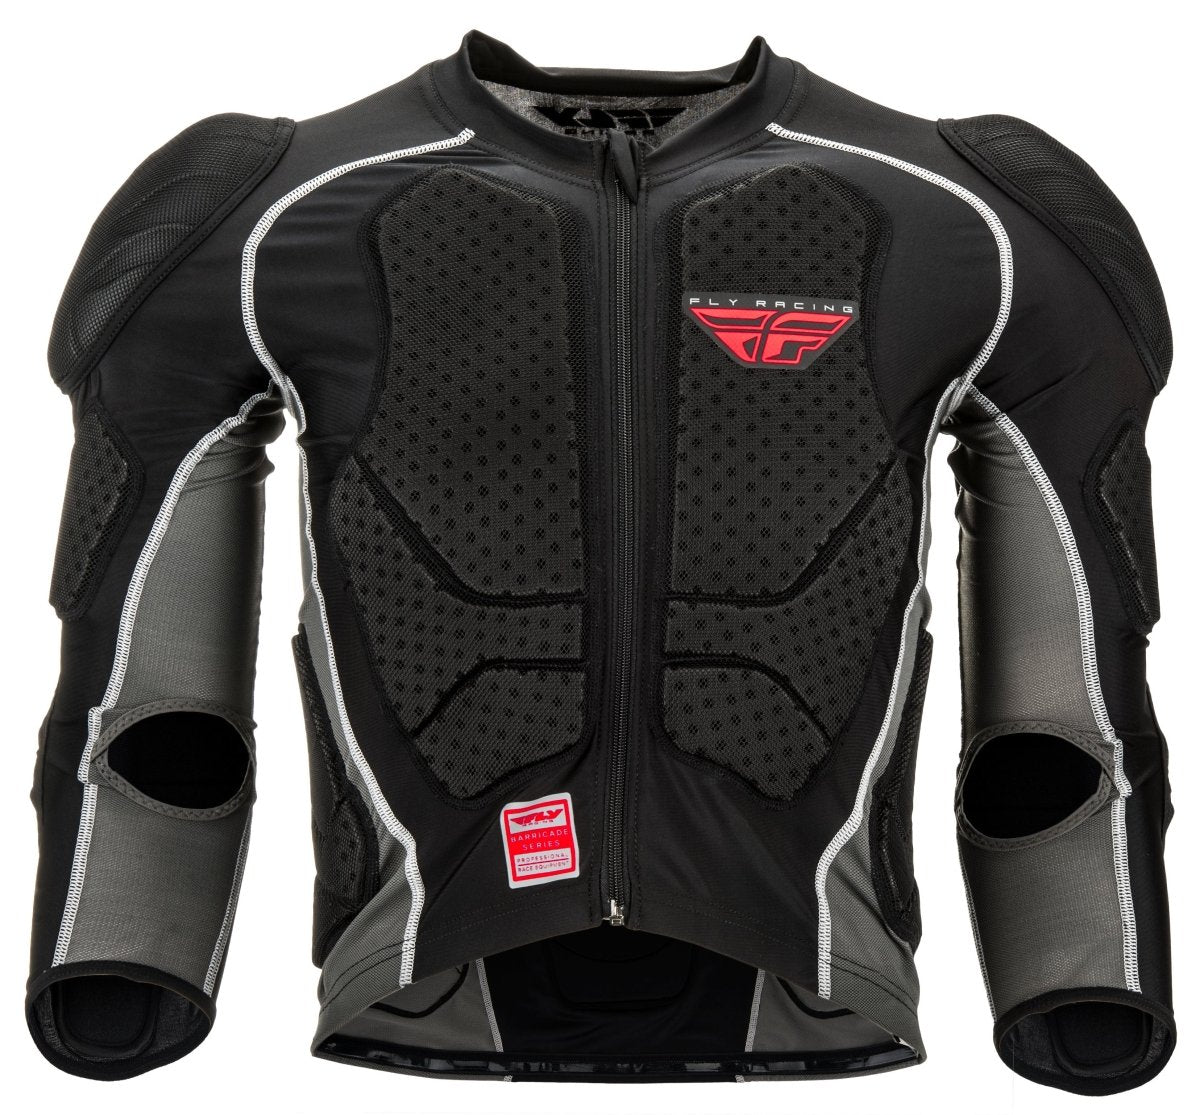 FLY RACING - BARRICADE LONG SLEEVE SUIT - 360-9740L - 191361083457